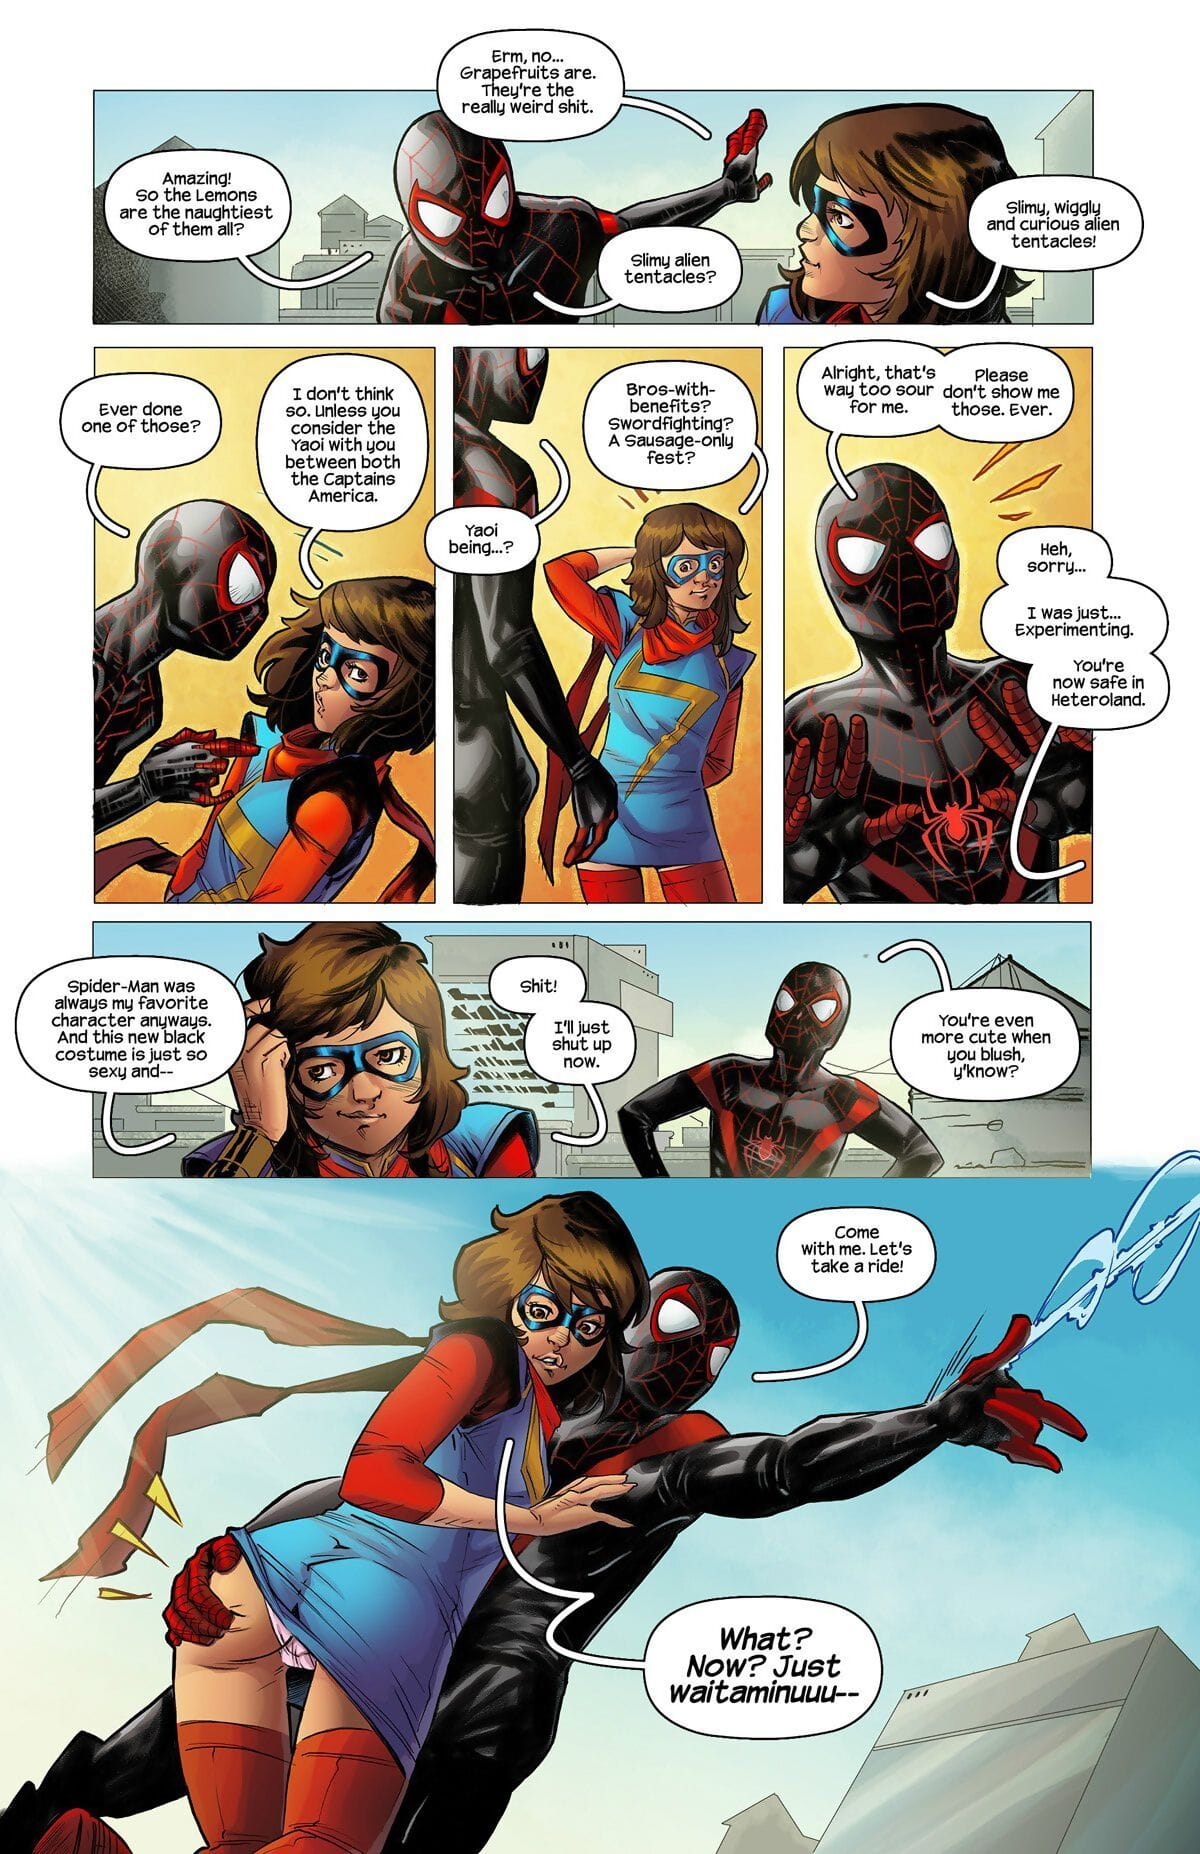 Tracy scops ms.marvel spiderman 001 – bayushi page 1